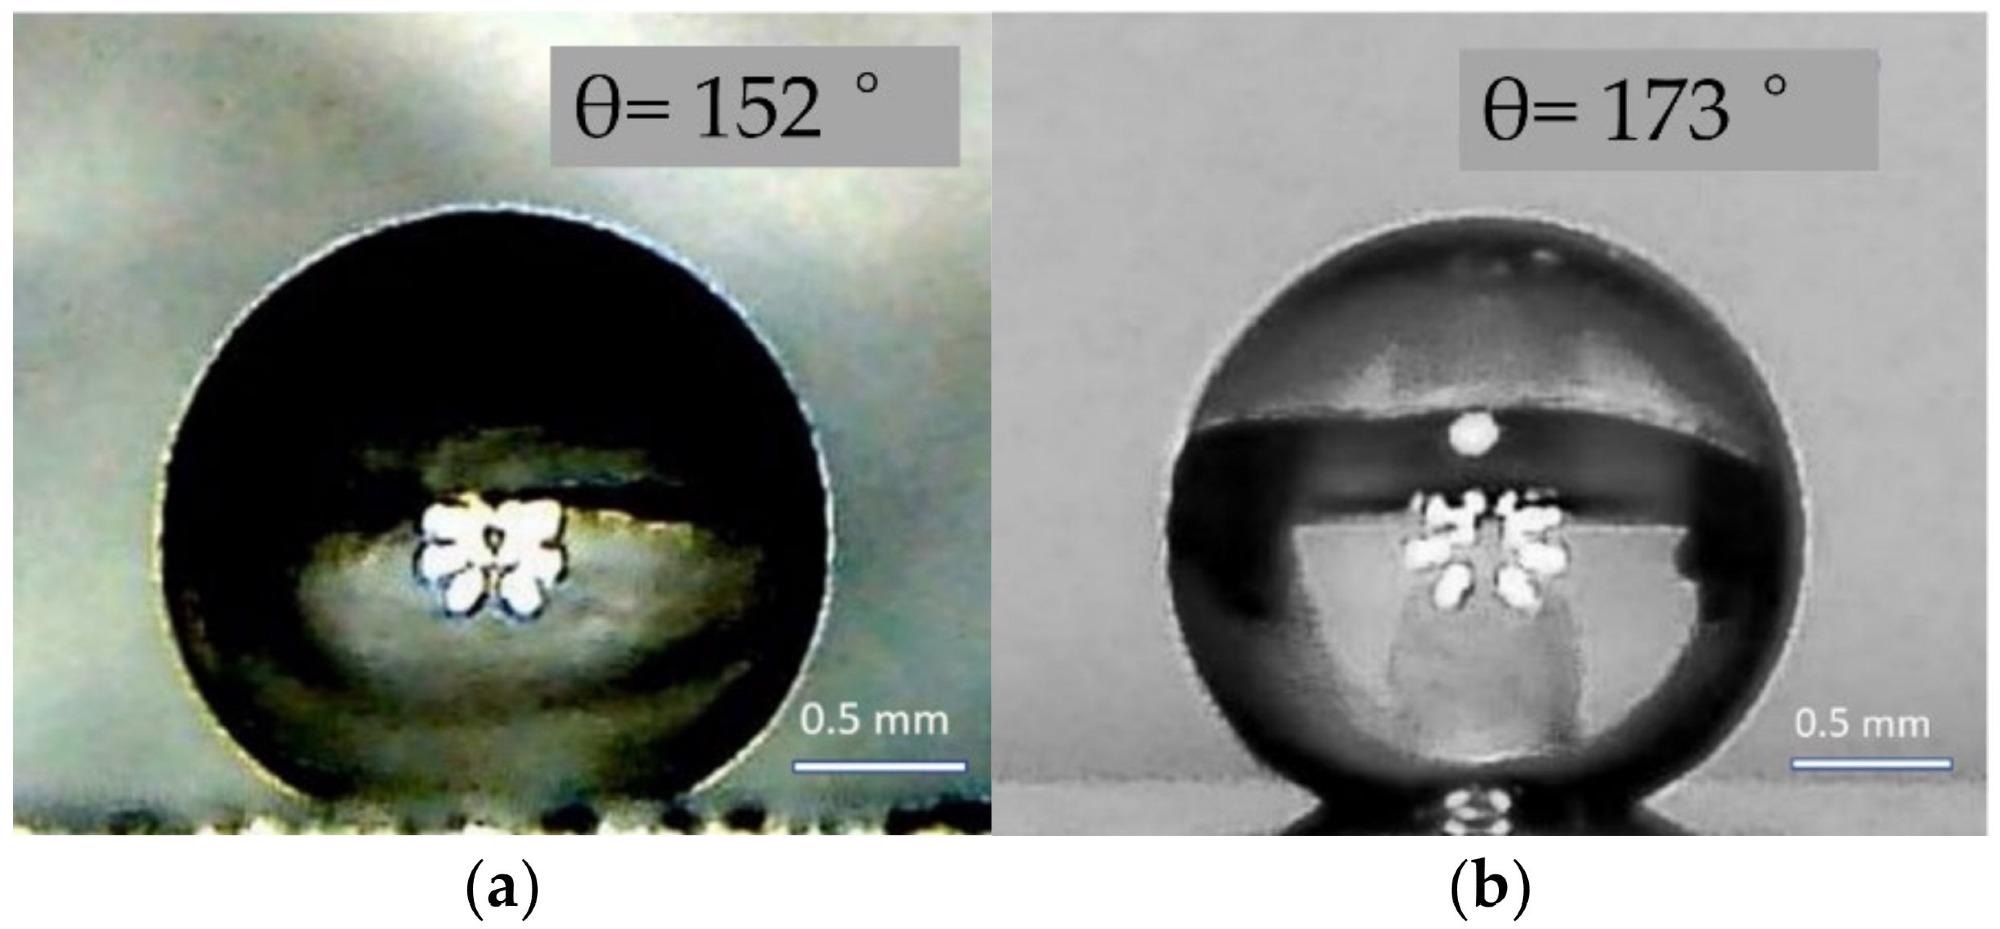 The shape of water droplets and the magnitude of contact angles on the surfaces of pure type II ZnO (a) and with a coating of Fe2O3 (b).